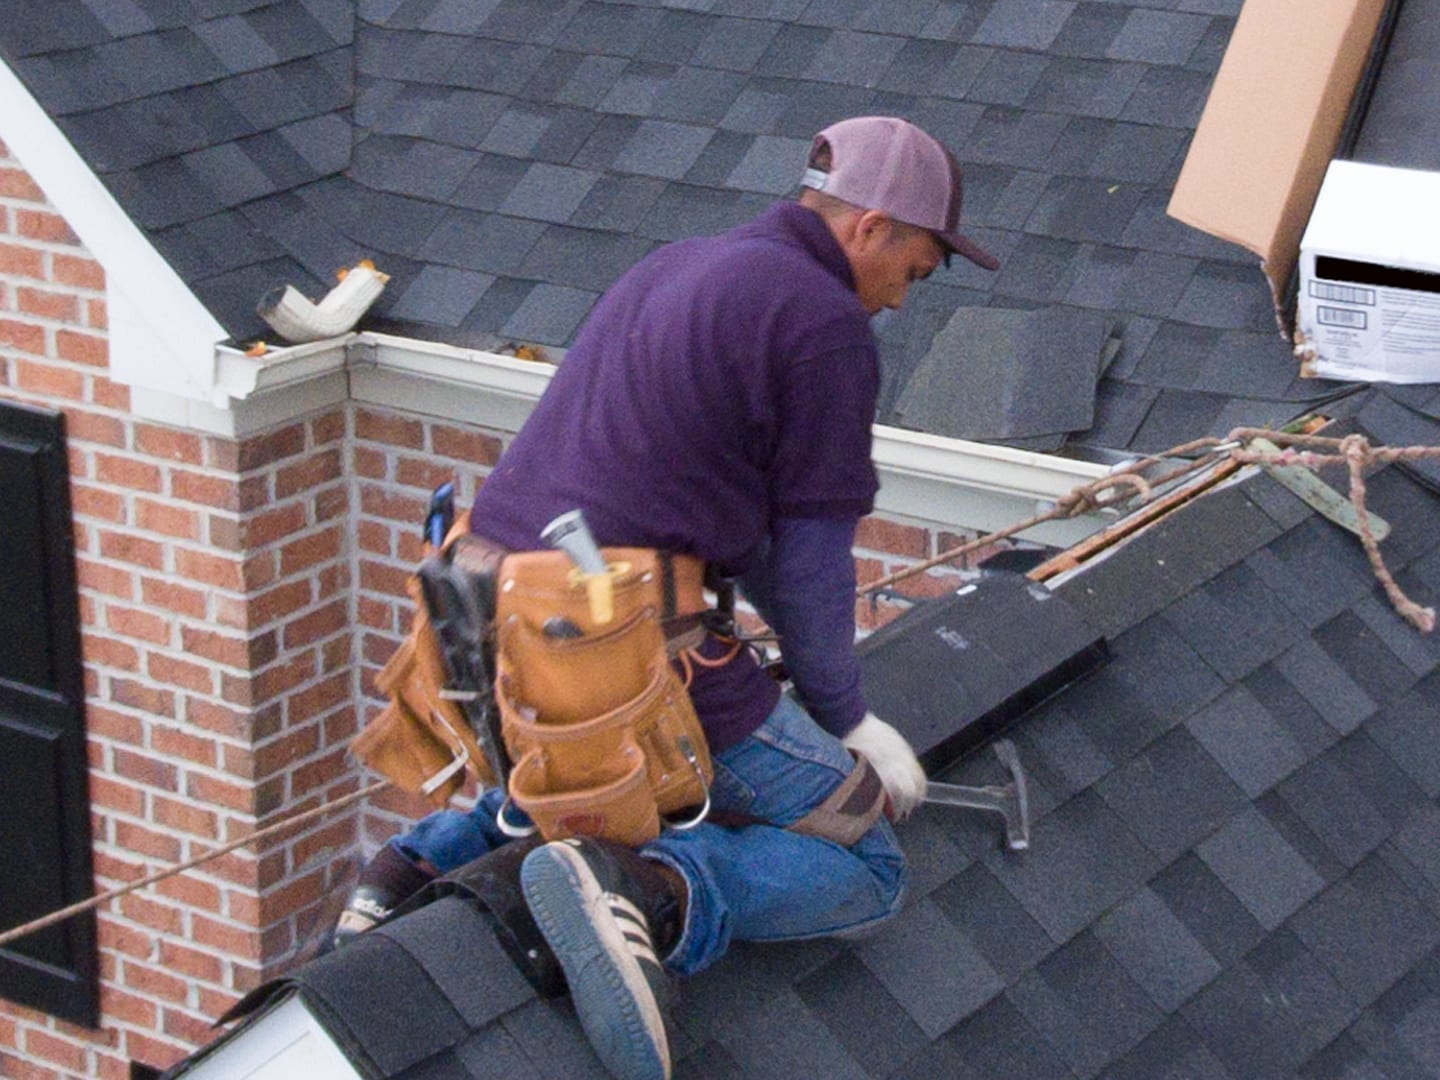 roofer using a roofing hatchet to install ridge cap shingles